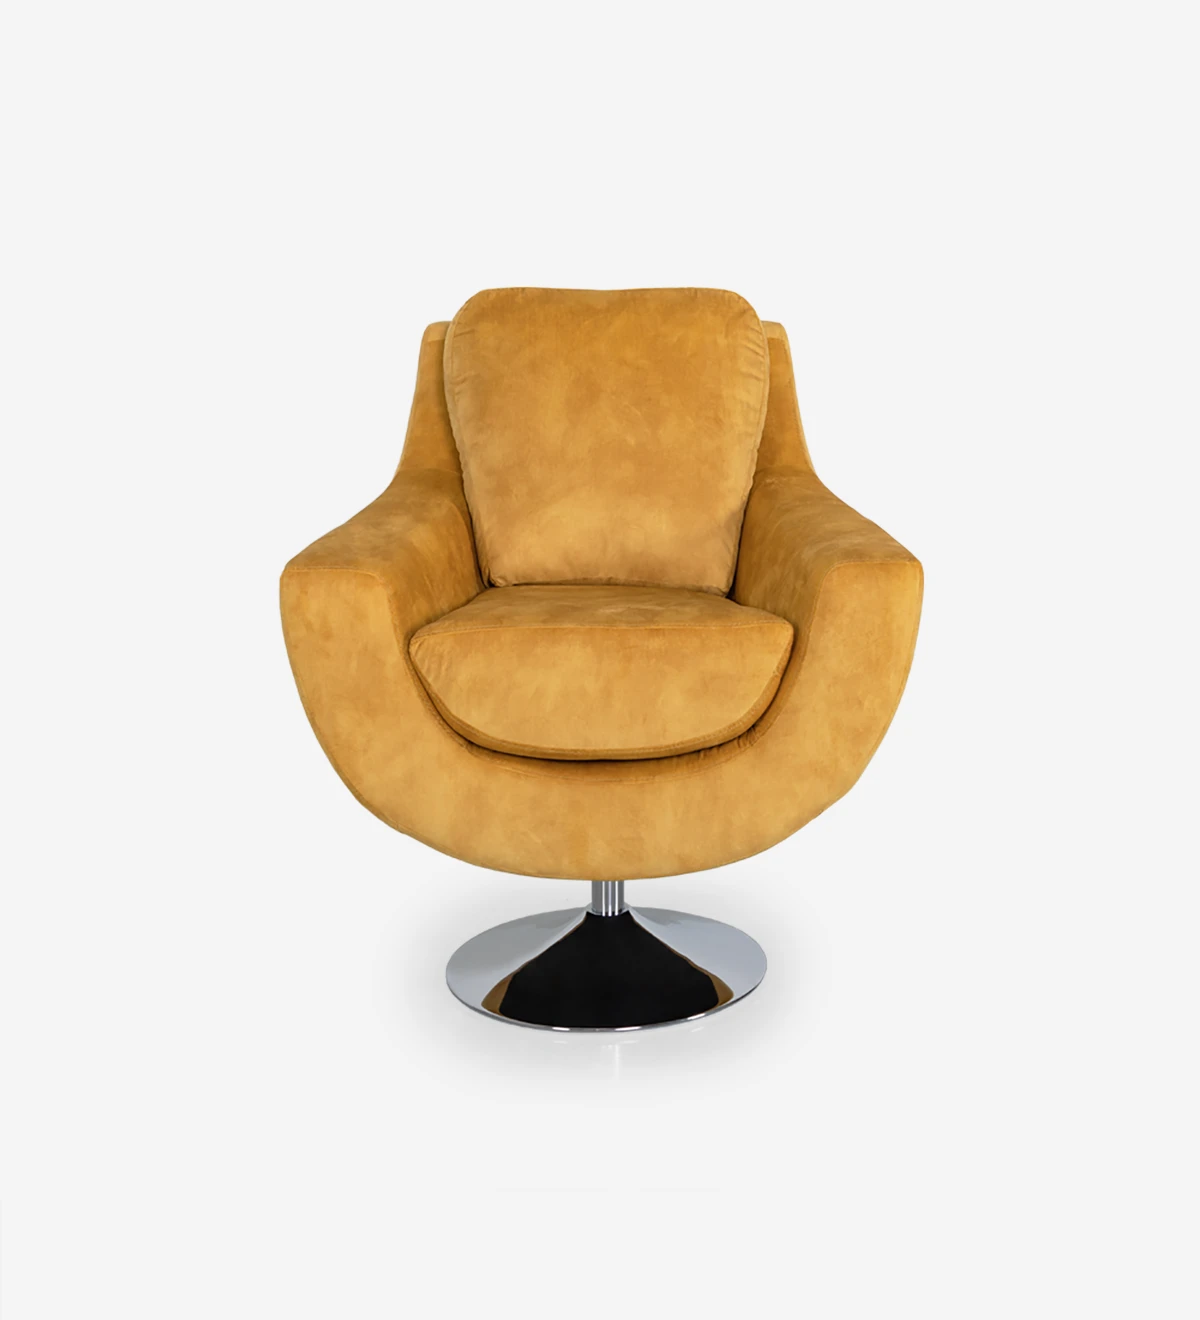 Armchair upholstered in fabric with swivel base.